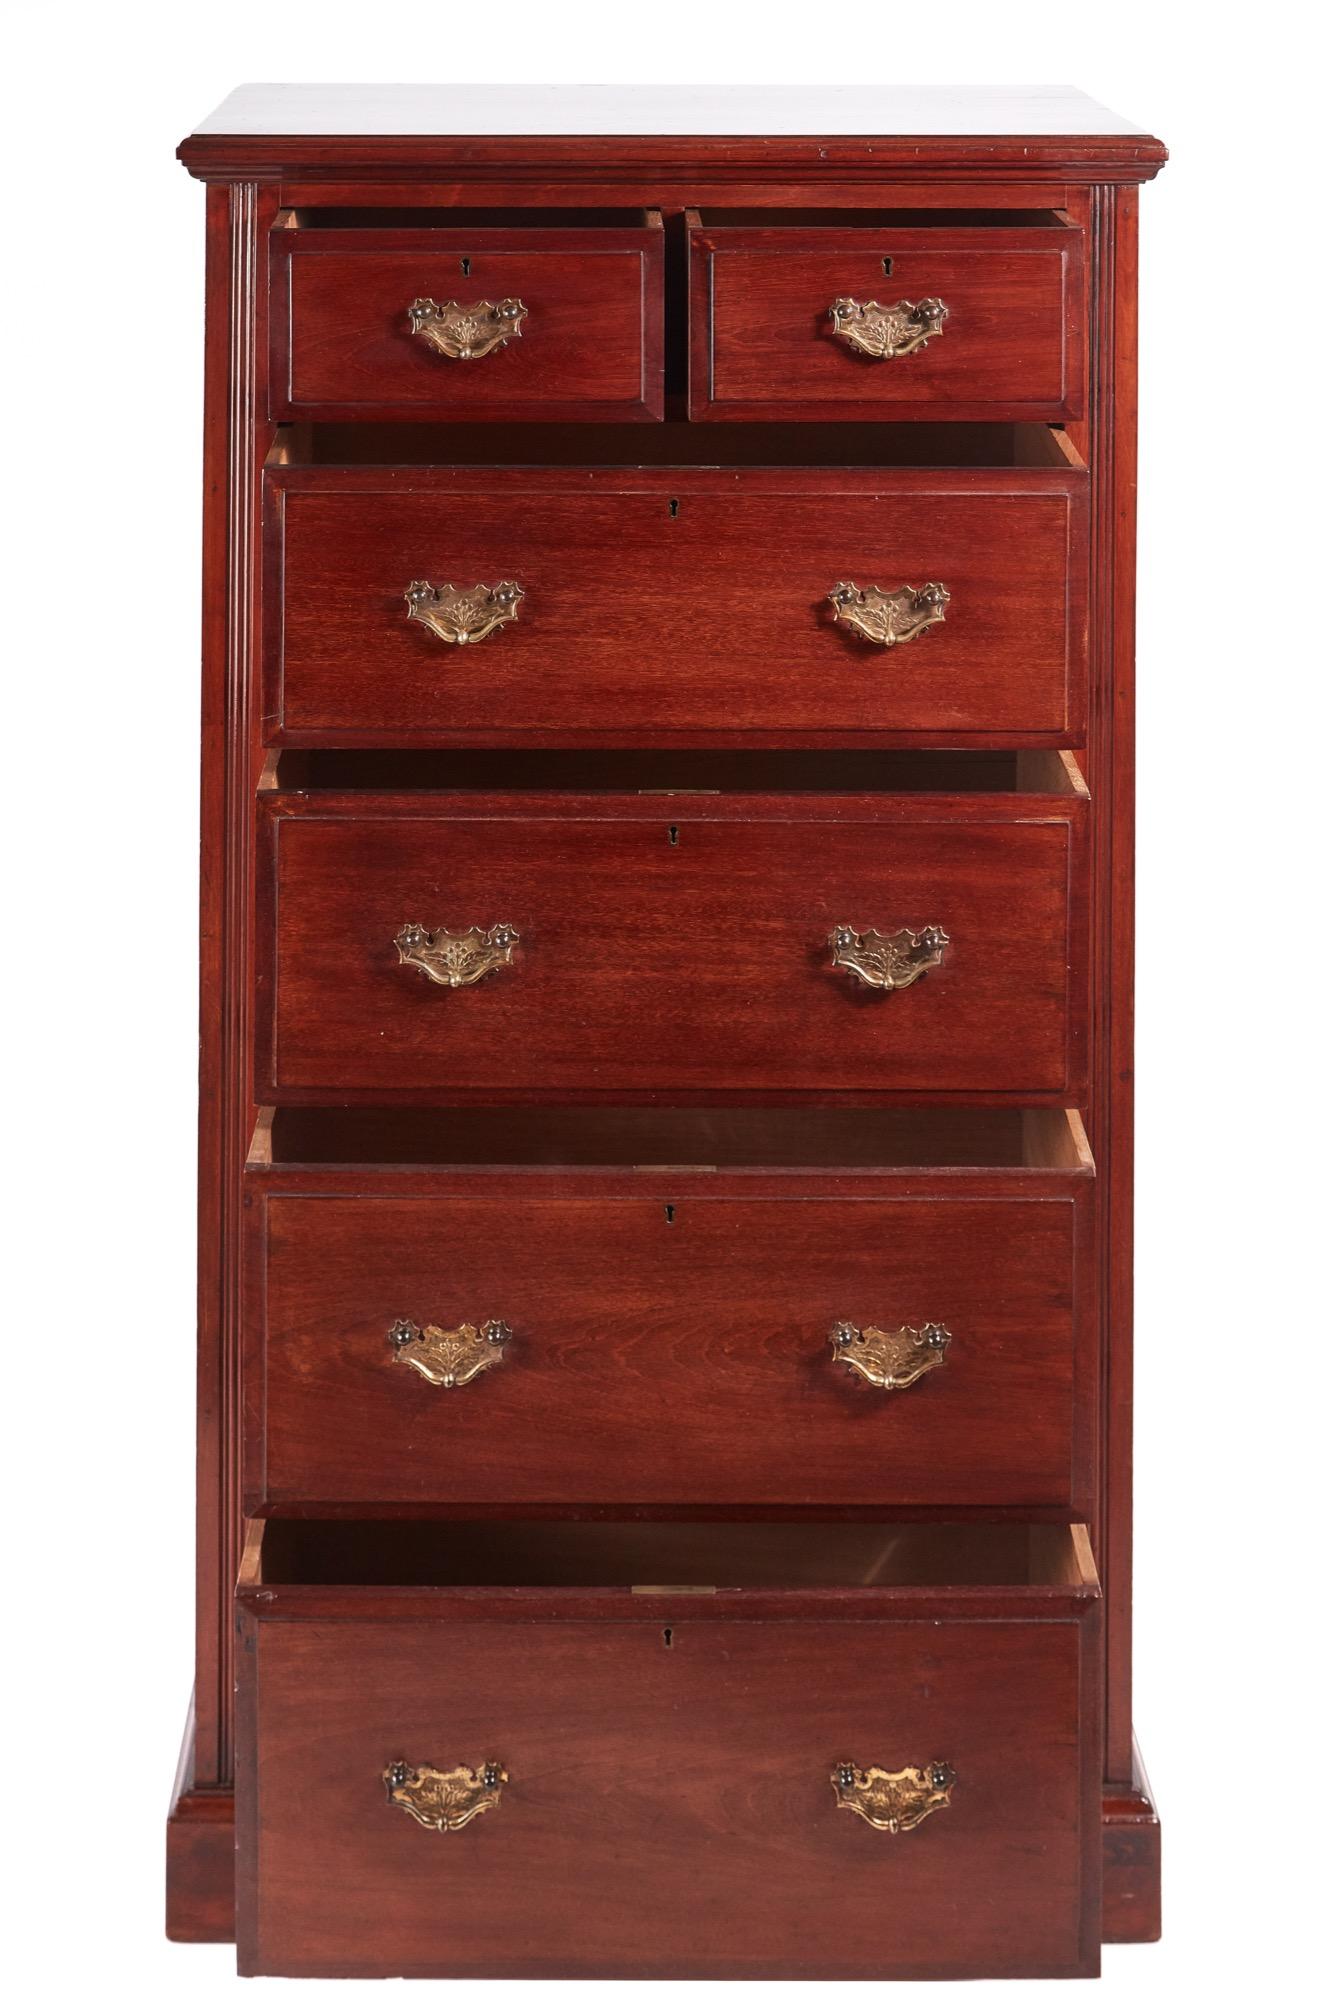 This is a 19th century Victorian antique walnut chest of drawers with a lovely top, 2 short drawers and 4 long drawers all with original brass handles and thumb moulded edge, reeded sides, attractive paneled ends, standing on a plinth base.
 